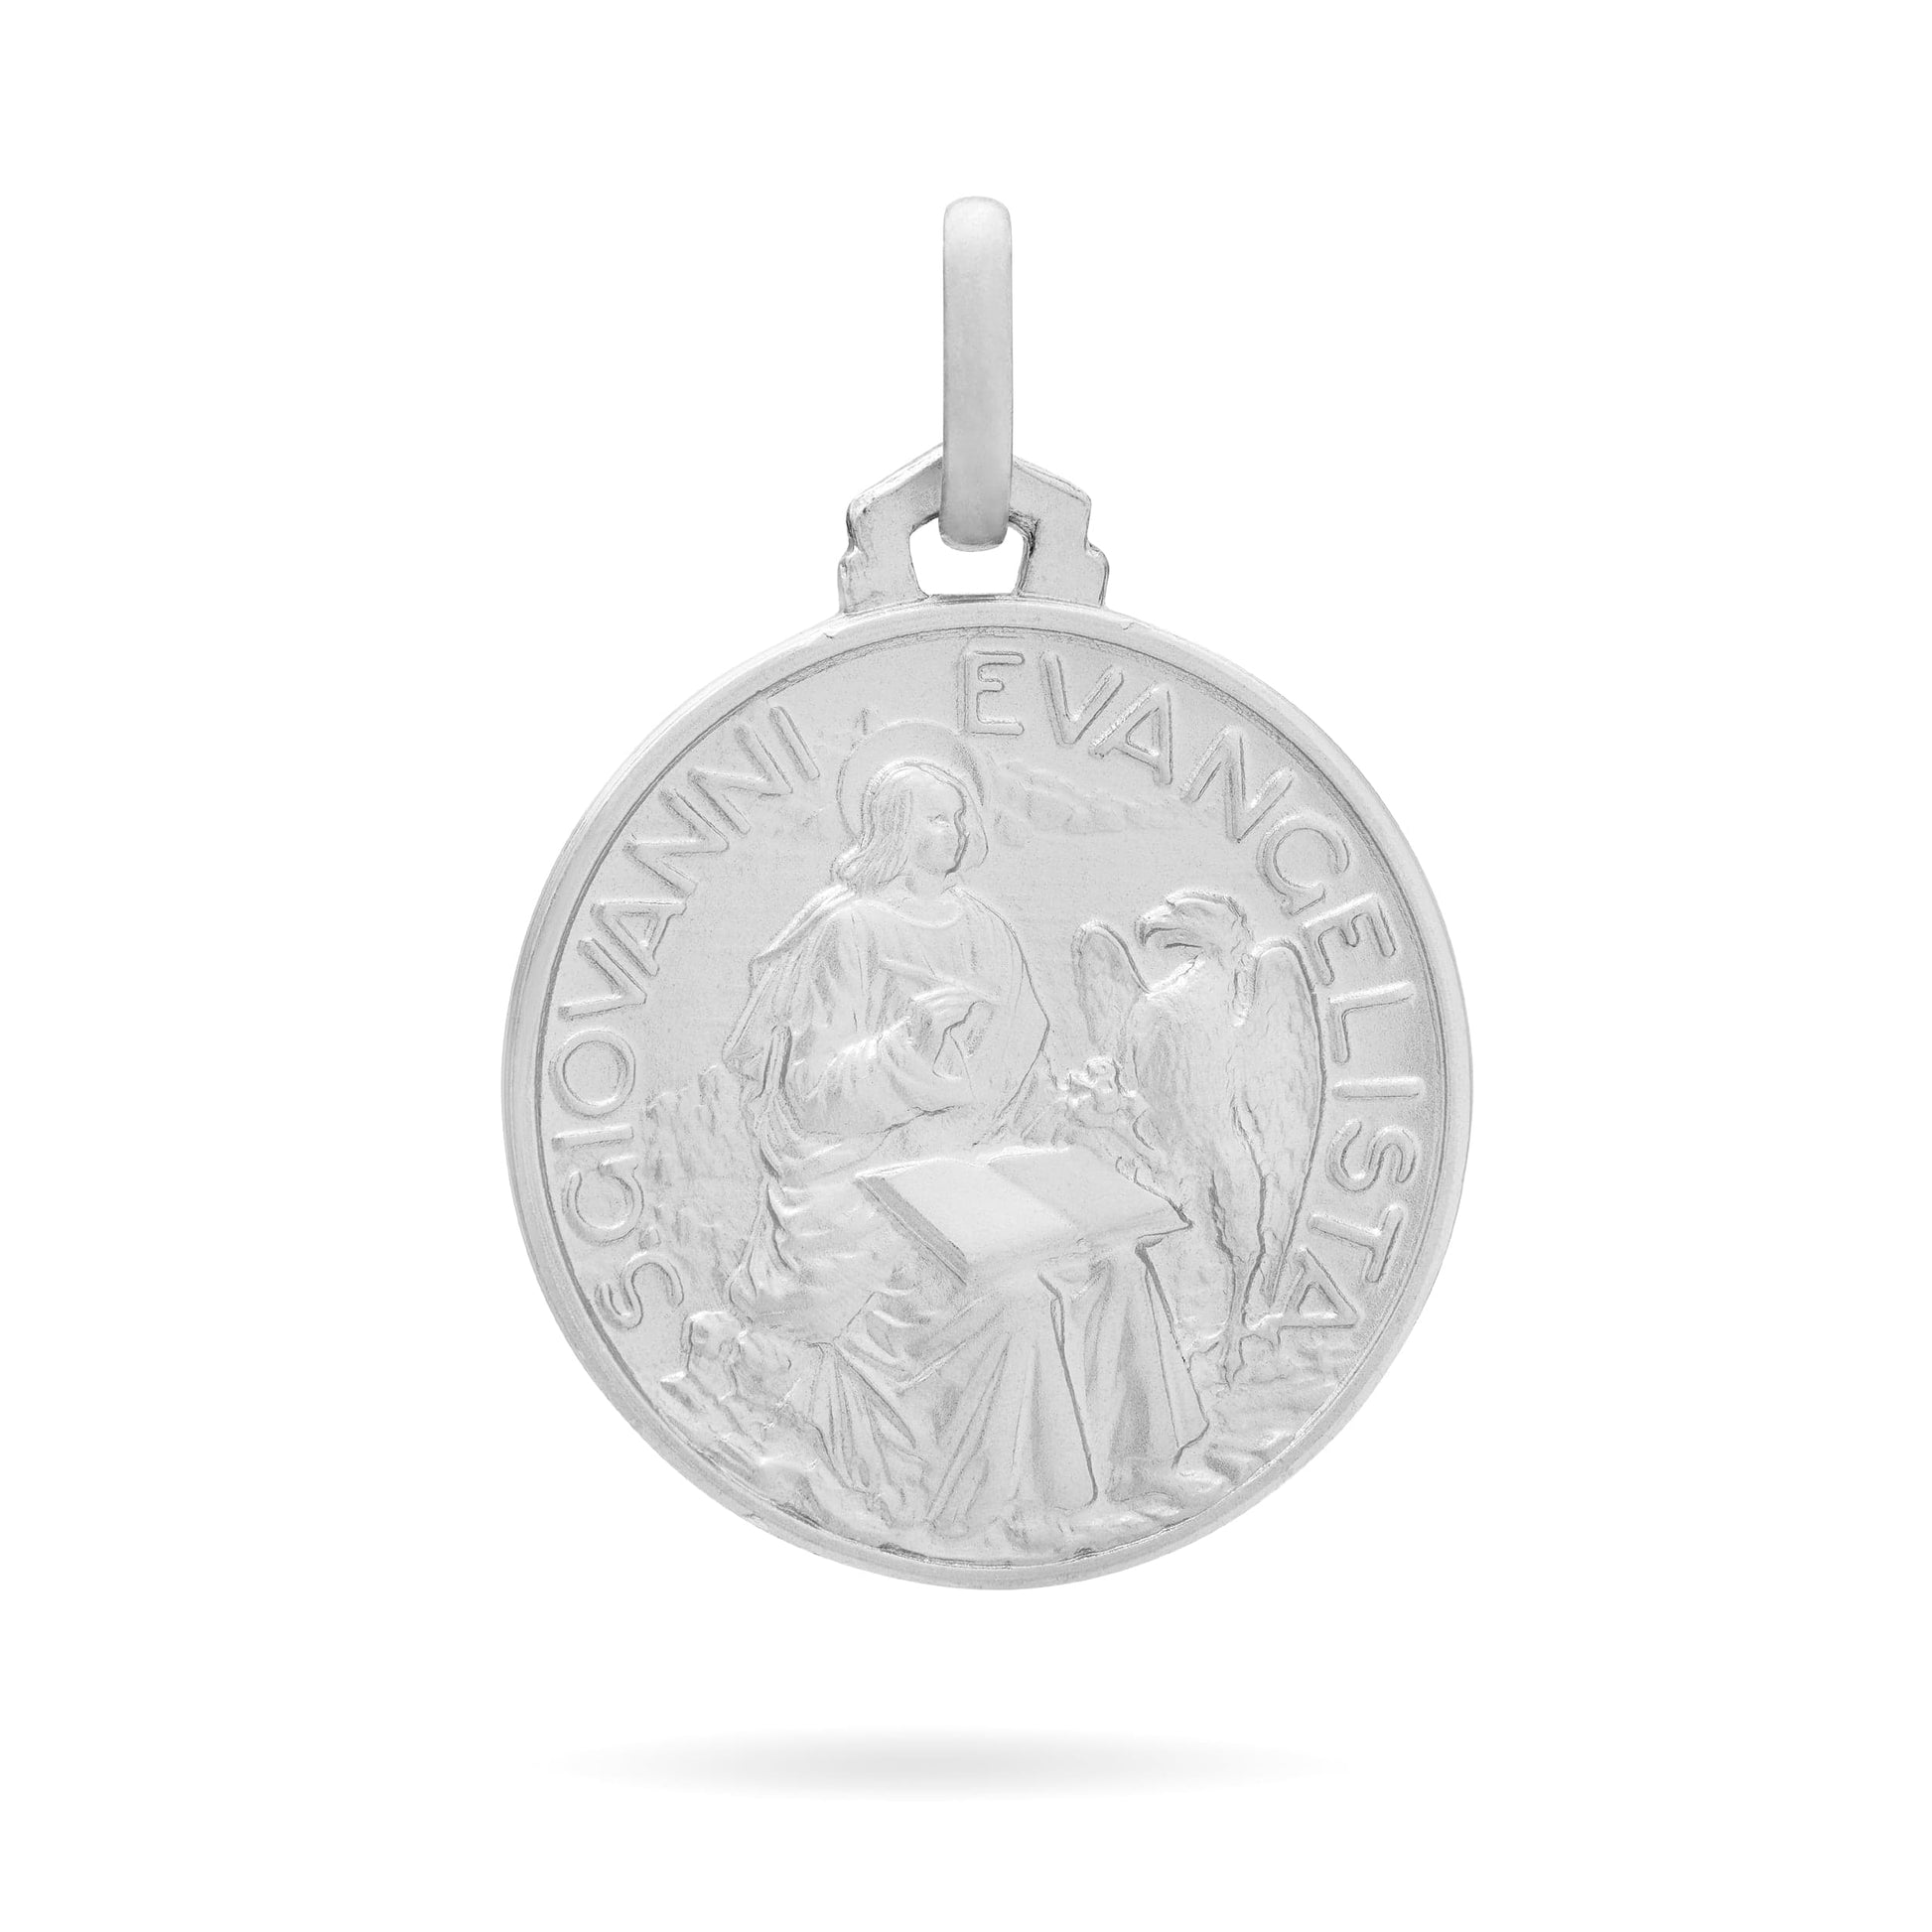 MONDO CATTOLICO Medal 14 mm (0.55 in) Sterling Silver St John the Evangelist